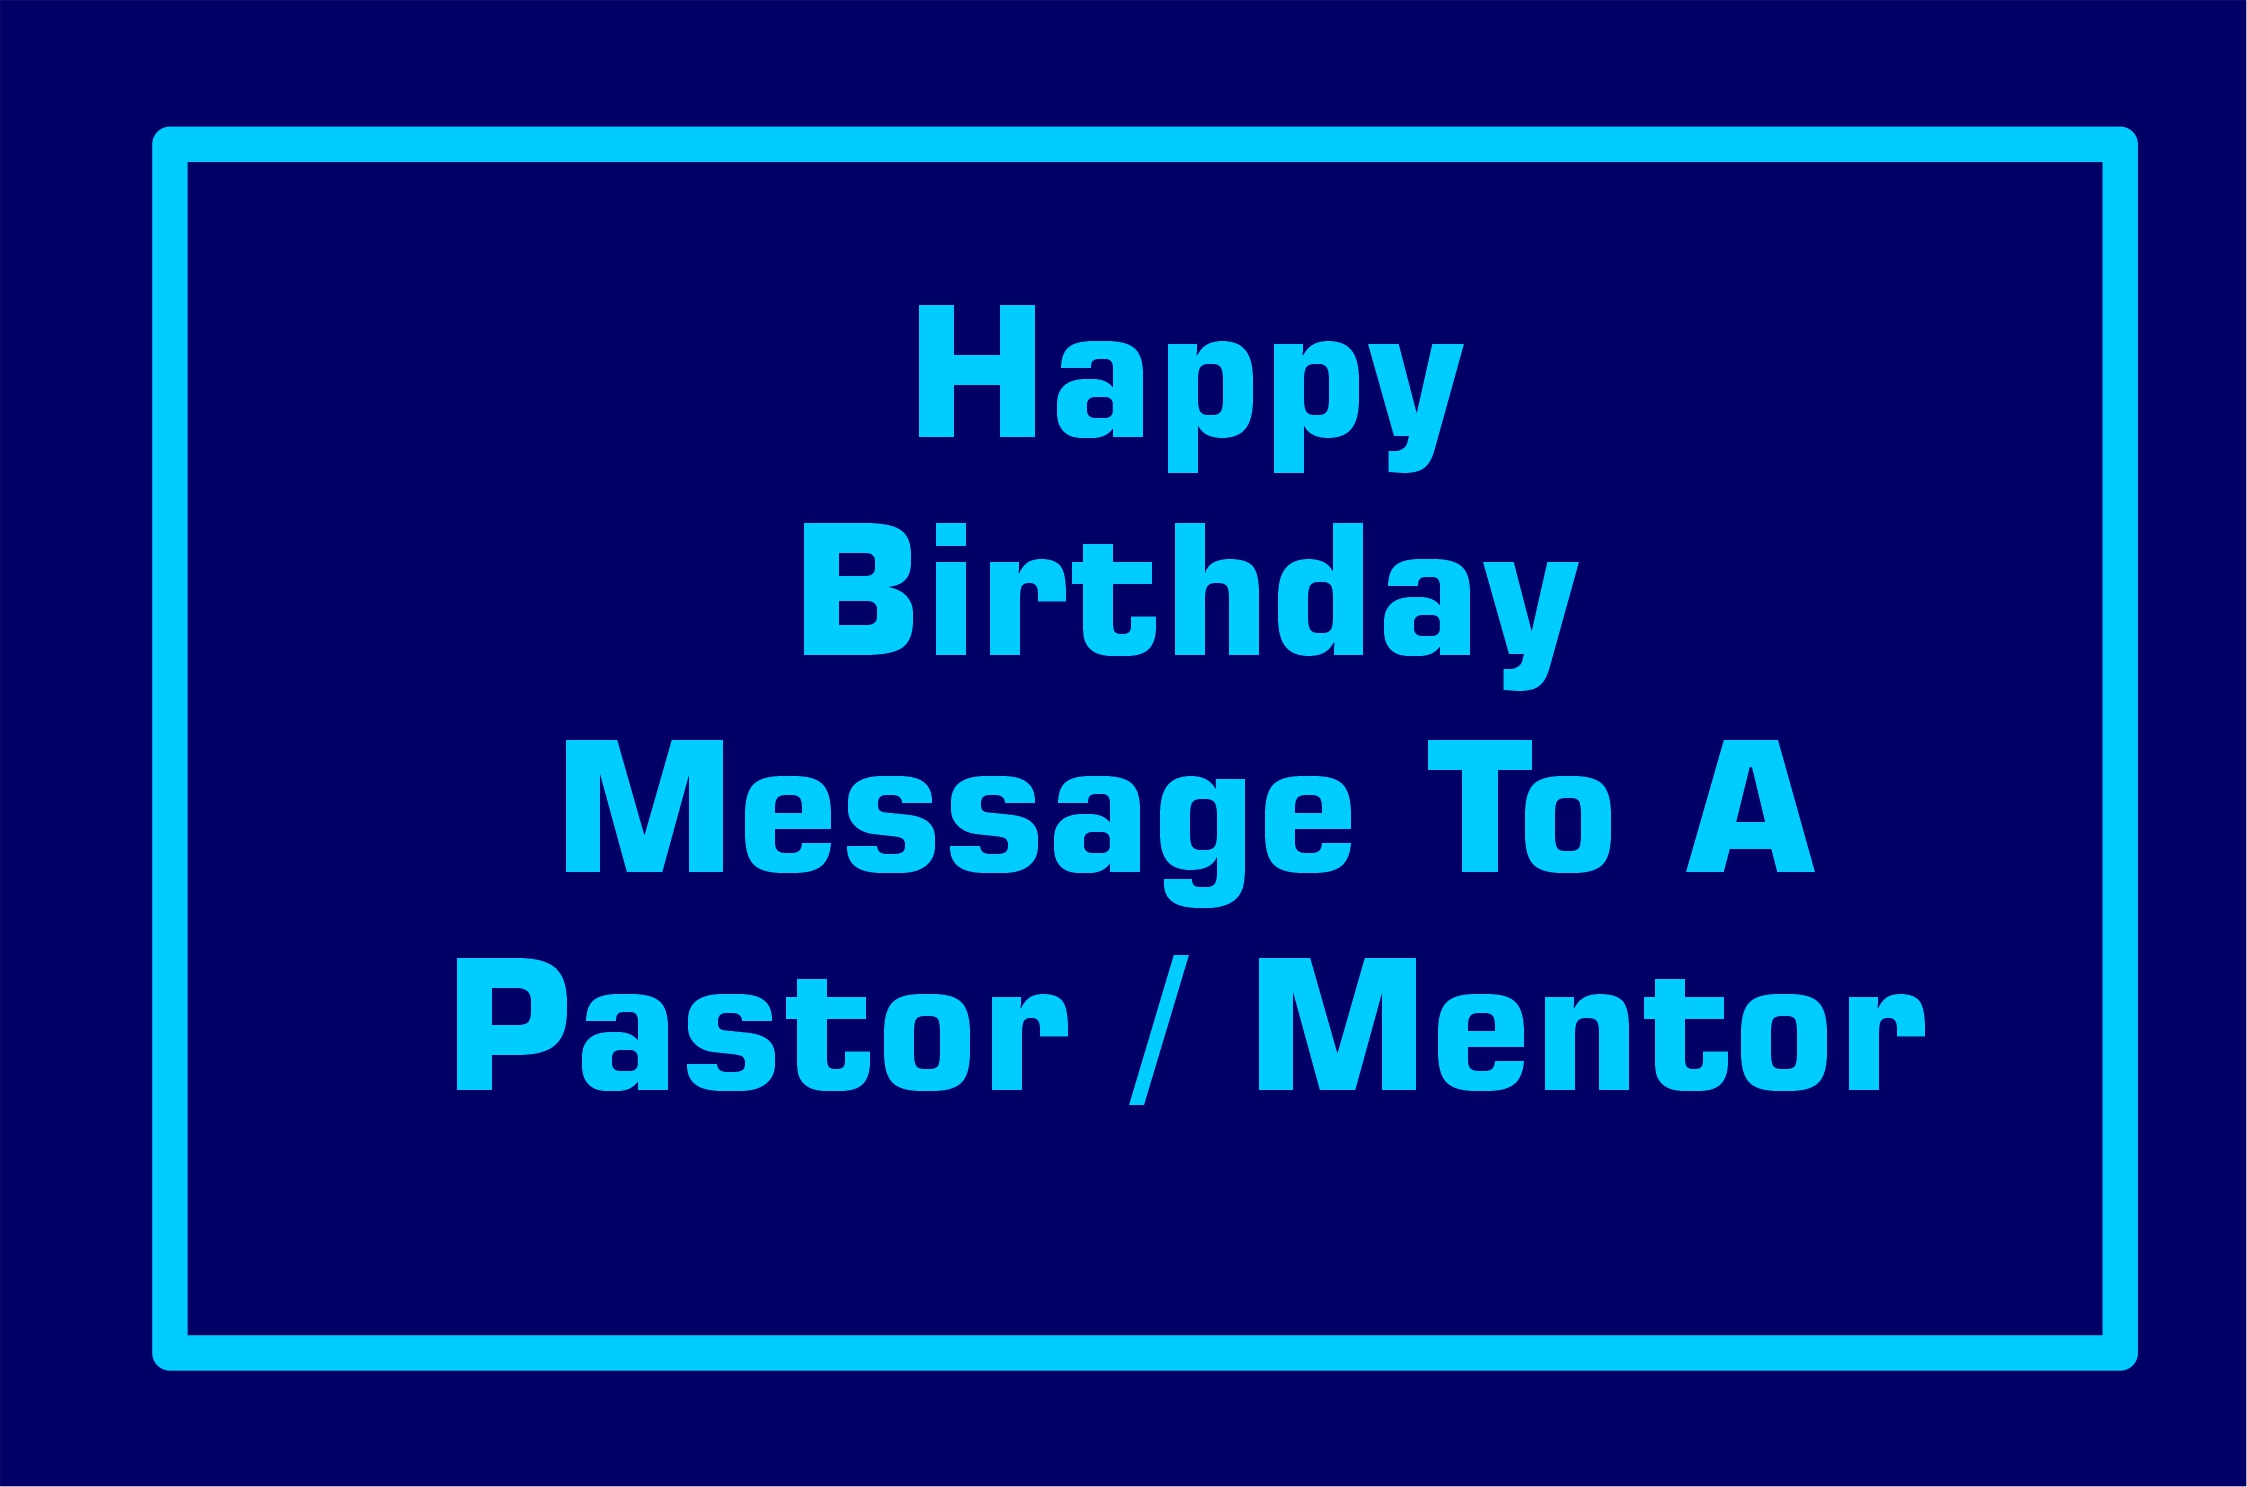 Happy Birthday Message To A Spiritual Leader